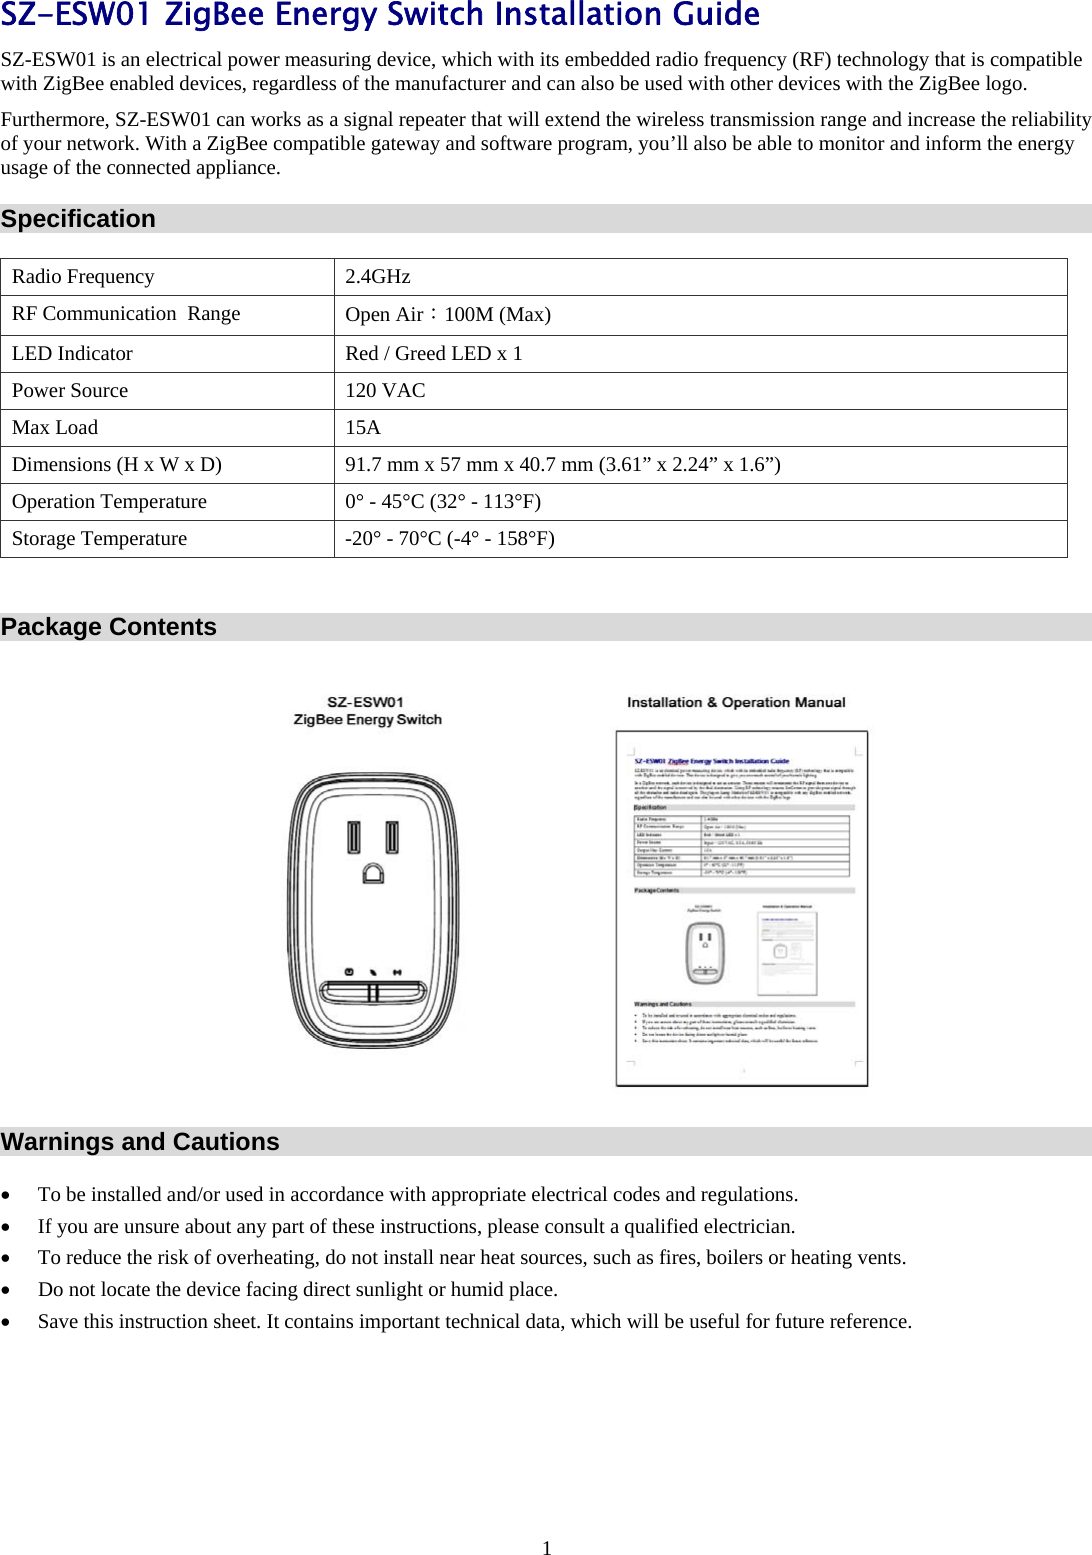 1 SZ-ESW01 ZigBee Energy Switch Installation Guide SZ-ESW01 is an electrical power measuring device, which with its embedded radio frequency (RF) technology that is compatible with ZigBee enabled devices, regardless of the manufacturer and can also be used with other devices with the ZigBee logo.  Furthermore, SZ-ESW01 can works as a signal repeater that will extend the wireless transmission range and increase the reliability of your network. With a ZigBee compatible gateway and software program, you’ll also be able to monitor and inform the energy usage of the connected appliance. Specification Radio Frequency  2.4GHz RF Communication  Range  Open Air：100M (Max) LED Indicator  Red / Greed LED x 1 Power Source  120 VAC Max Load  15A Dimensions (H x W x D)  91.7 mm x 57 mm x 40.7 mm (3.61” x 2.24” x 1.6”) Operation Temperature  0° - 45°C (32° - 113°F) Storage Temperature  -20° - 70°C (-4° - 158°F)  Package Contents  Warnings and Cautions • To be installed and/or used in accordance with appropriate electrical codes and regulations.   • If you are unsure about any part of these instructions, please consult a qualified electrician.    • To reduce the risk of overheating, do not install near heat sources, such as fires, boilers or heating vents. • Do not locate the device facing direct sunlight or humid place.     • Save this instruction sheet. It contains important technical data, which will be useful for future reference.        